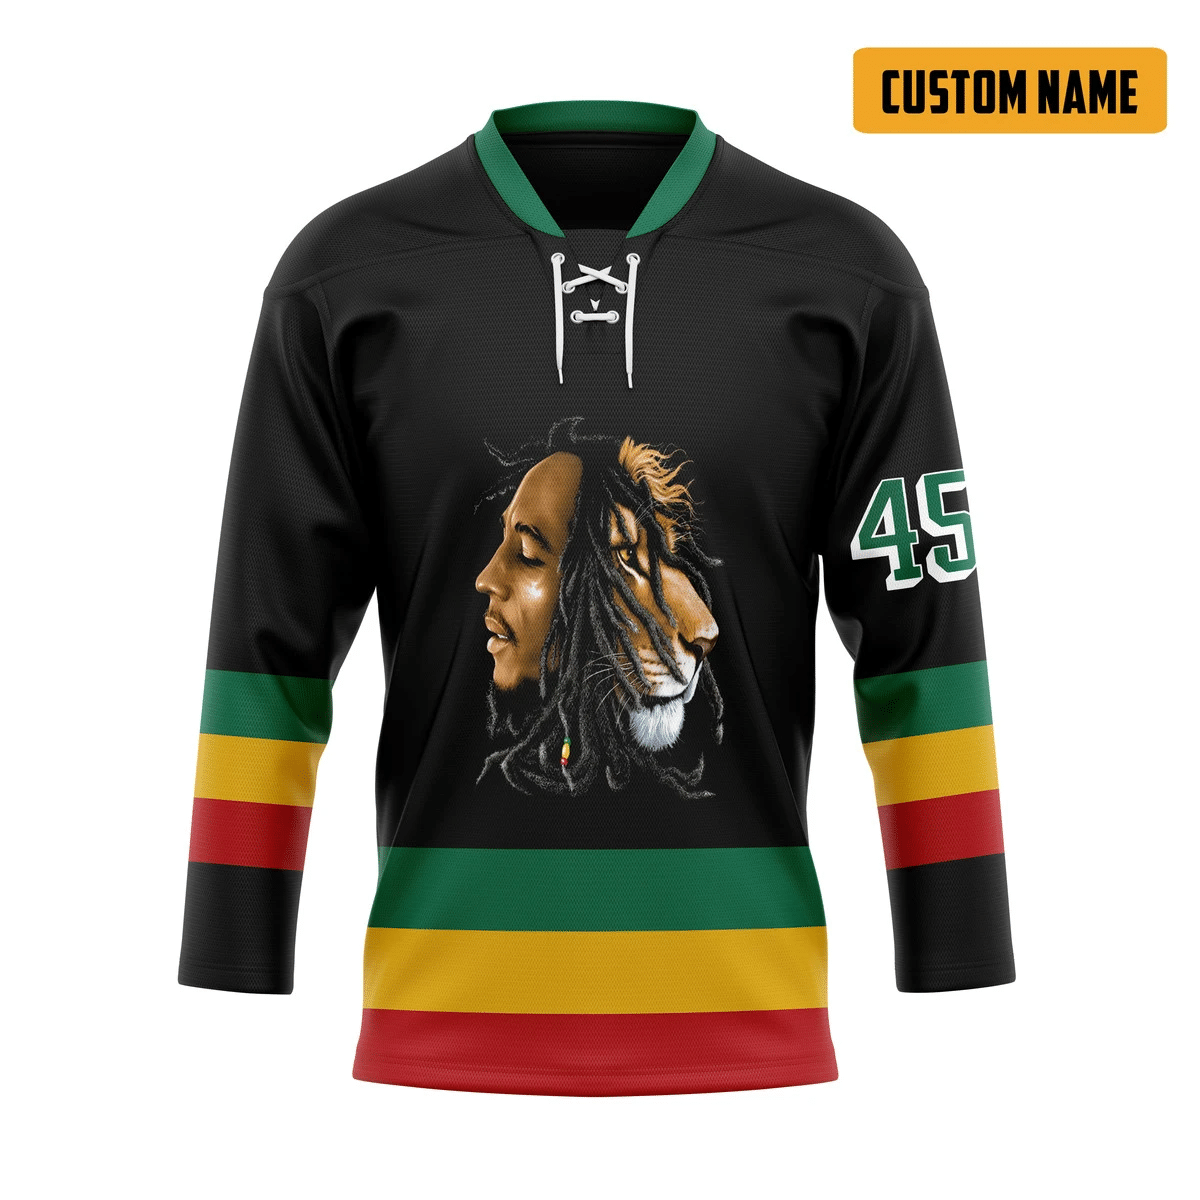 Choosing a hockey jersey is not as difficult as you think. 47